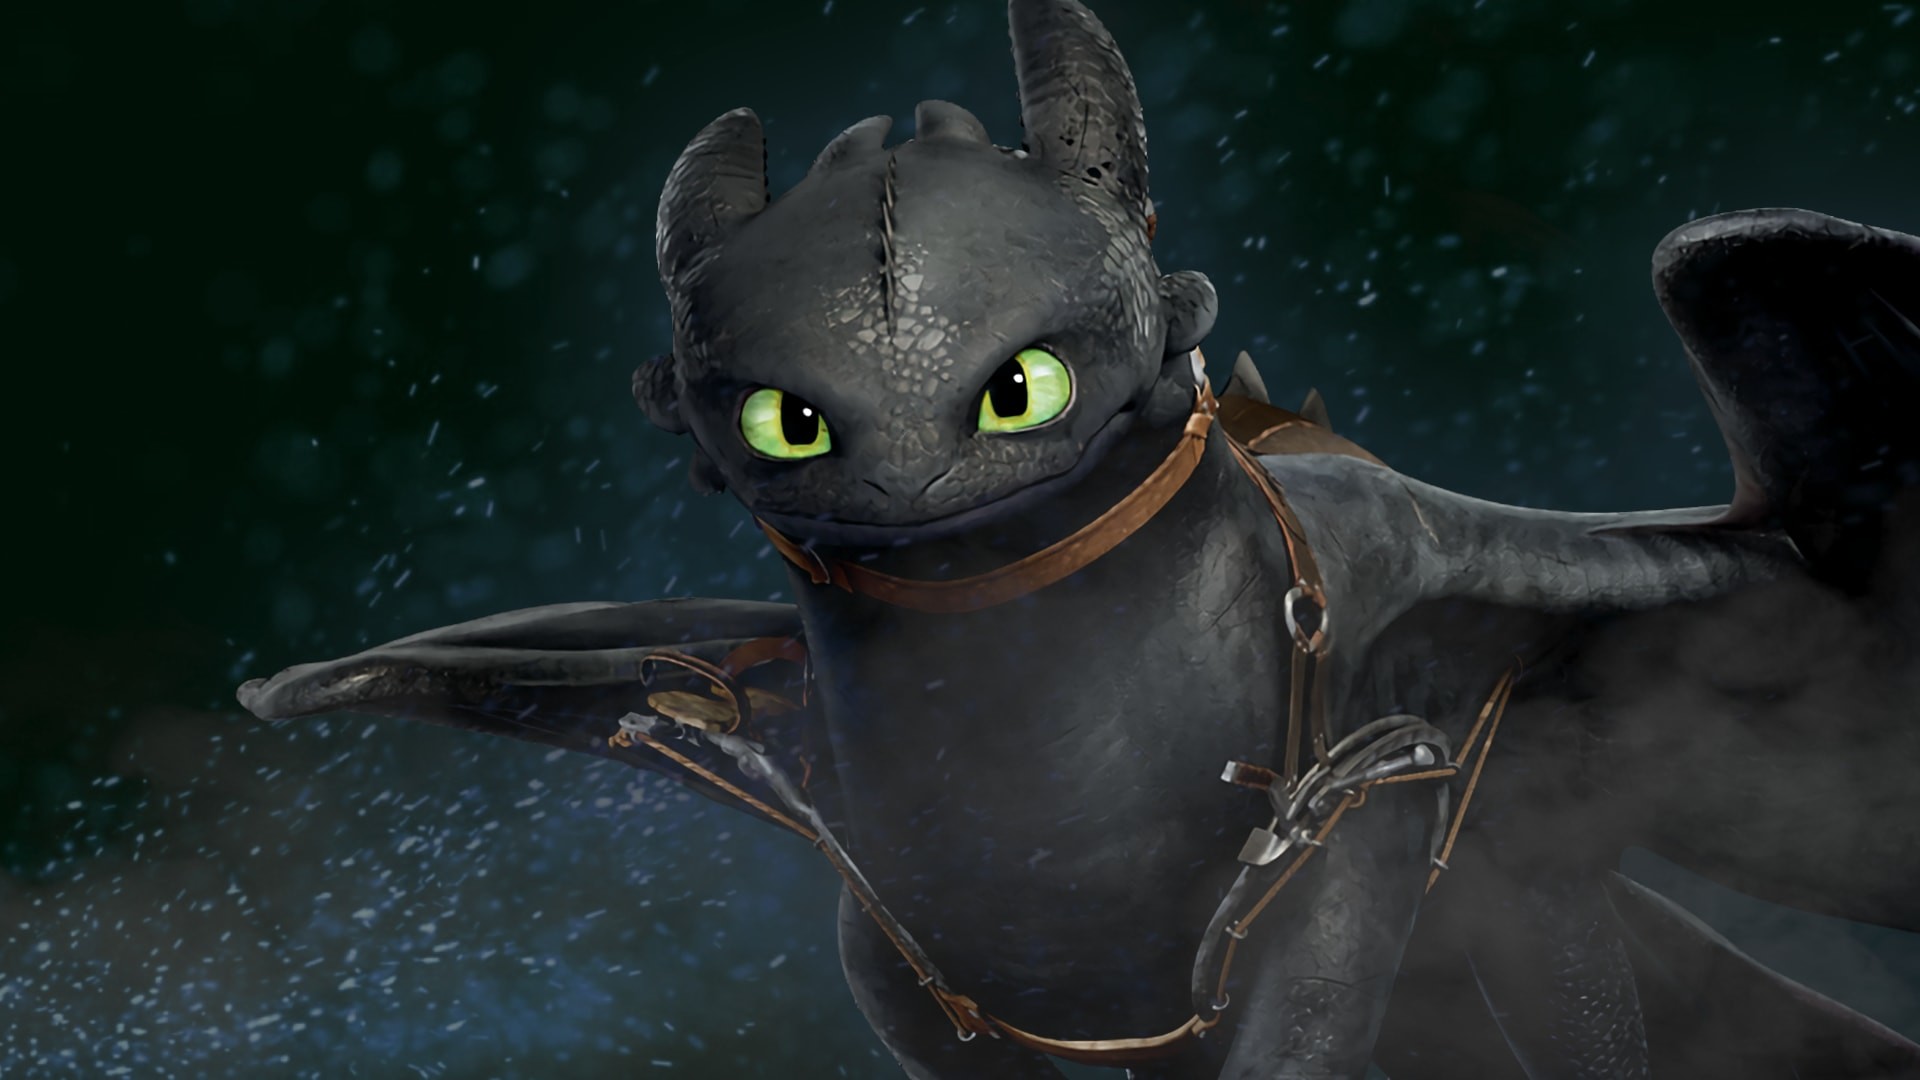 1920x1080 HD Wallpaper Toothless, How to Train Your Dragon